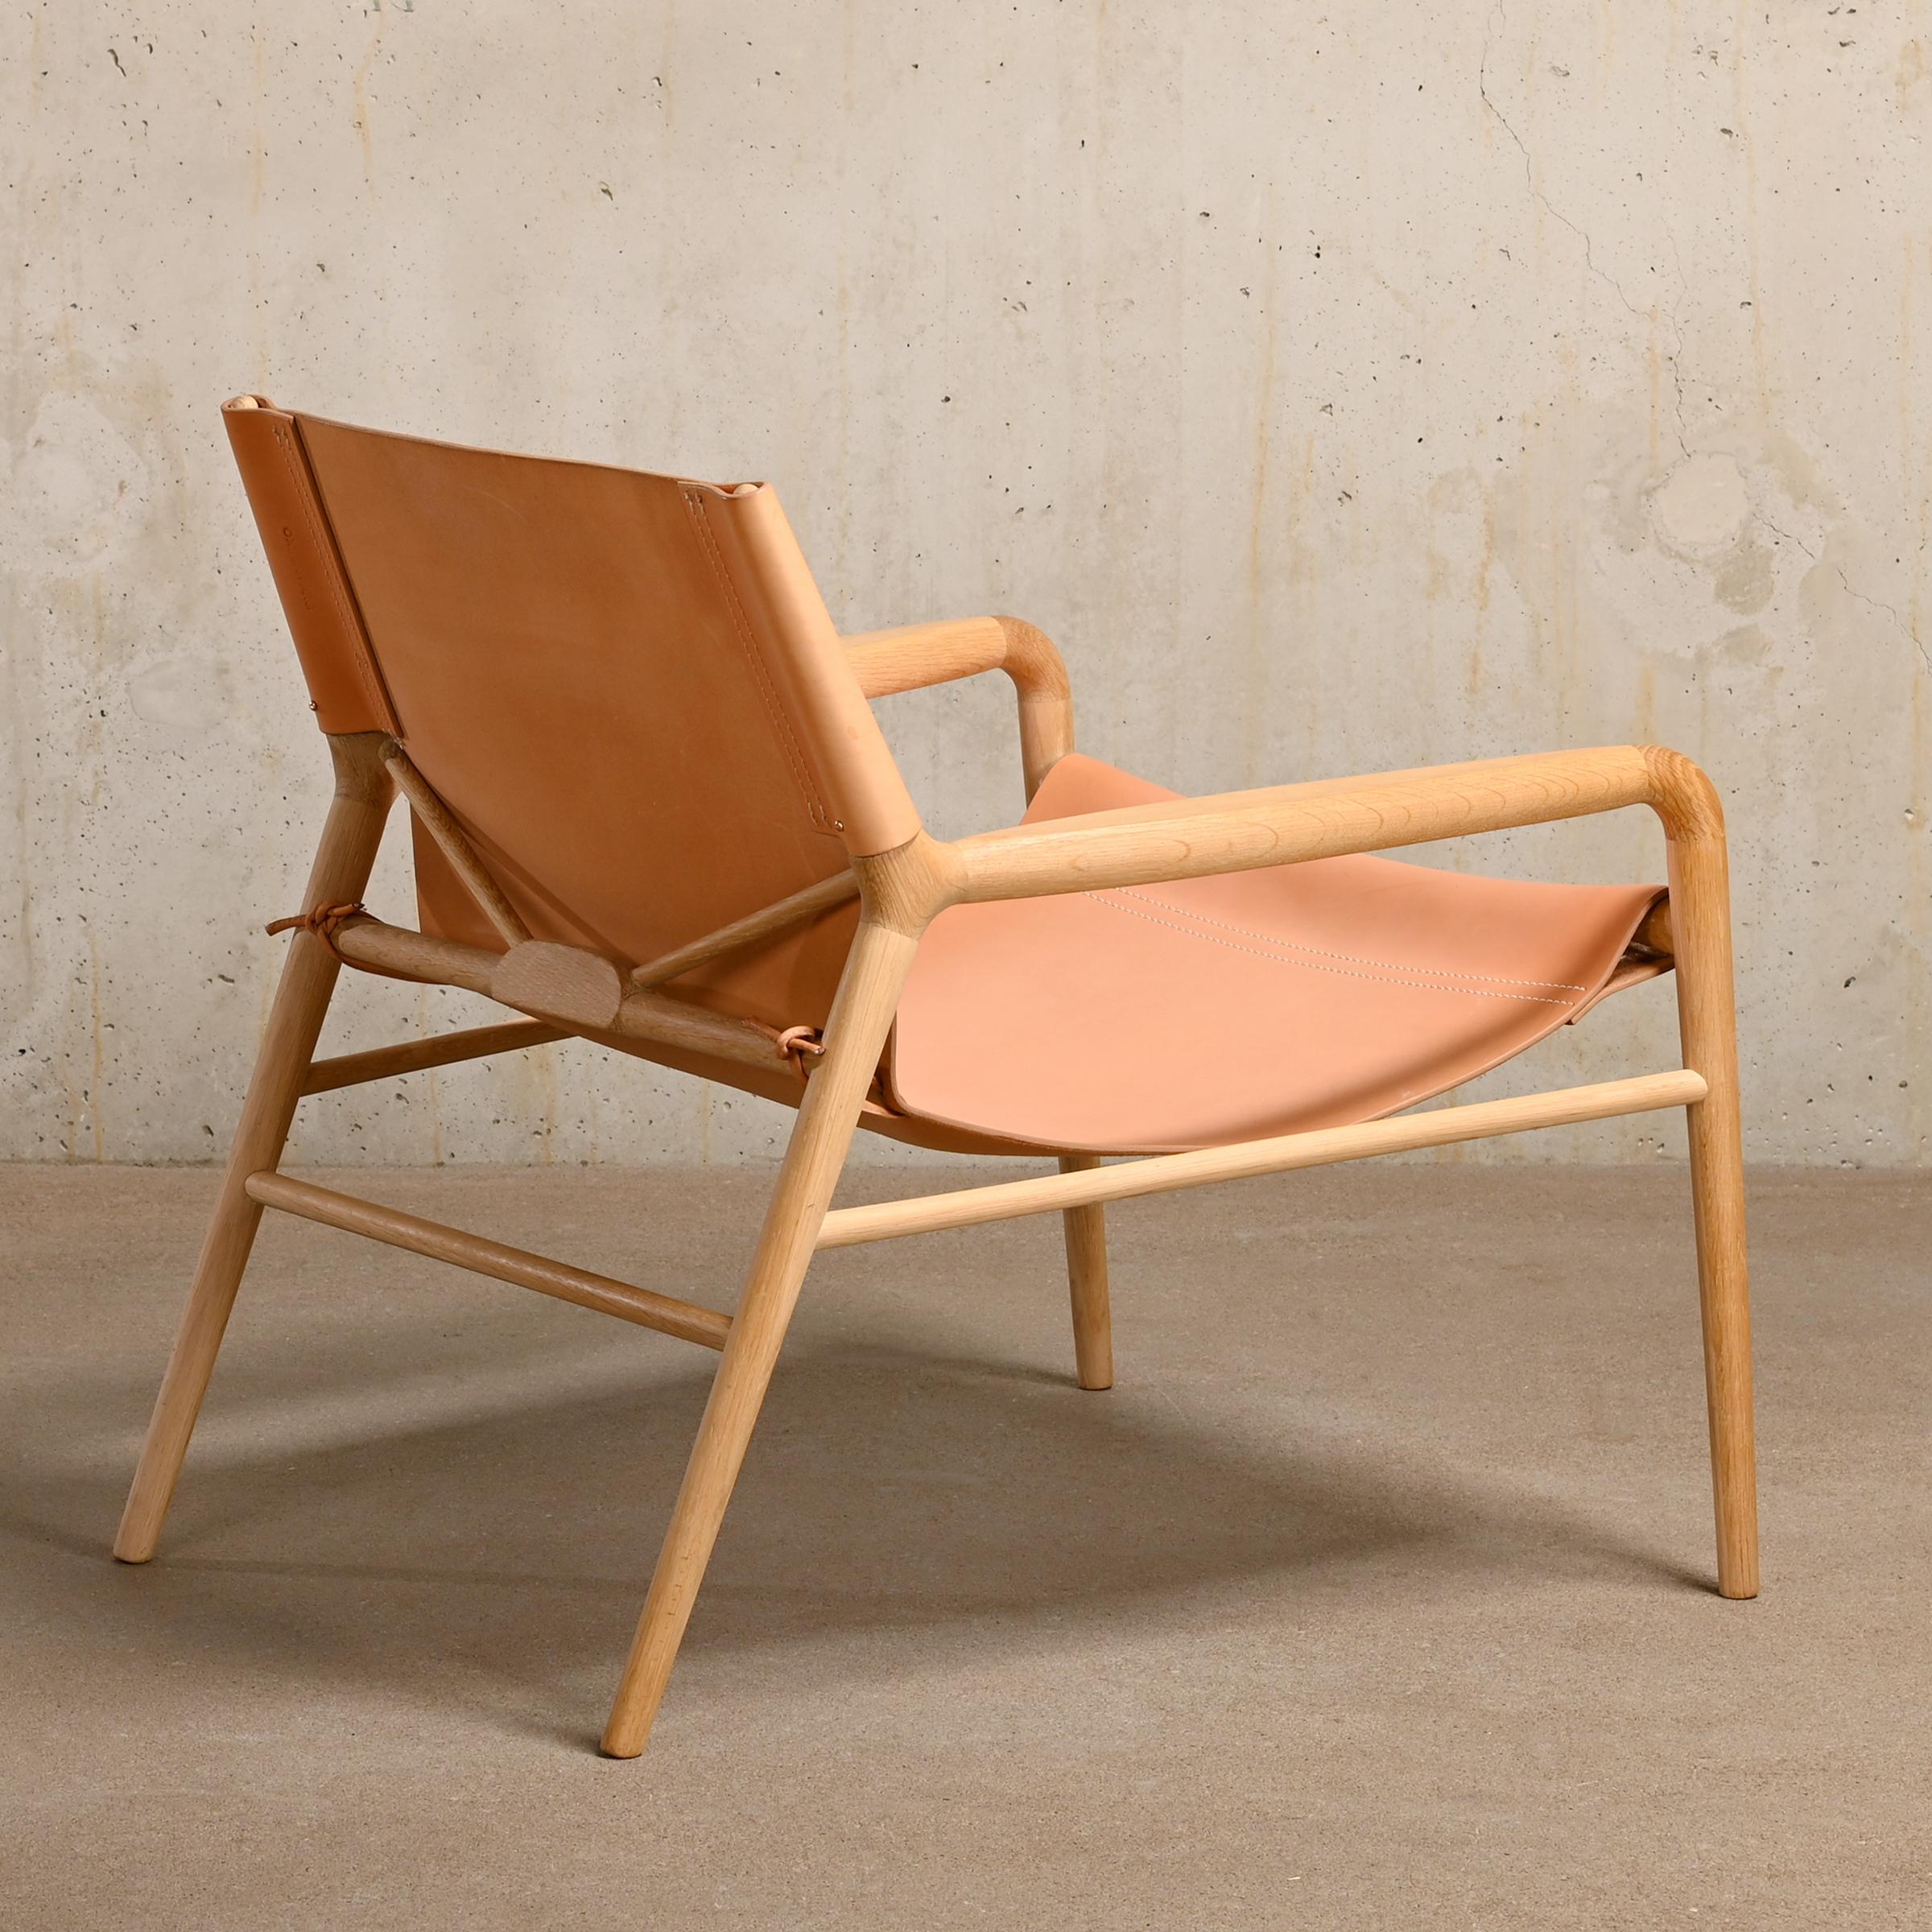 Contemporary Dennis Marquart Rama Chair in Natural Leather and Oak for Oxdenmarq For Sale